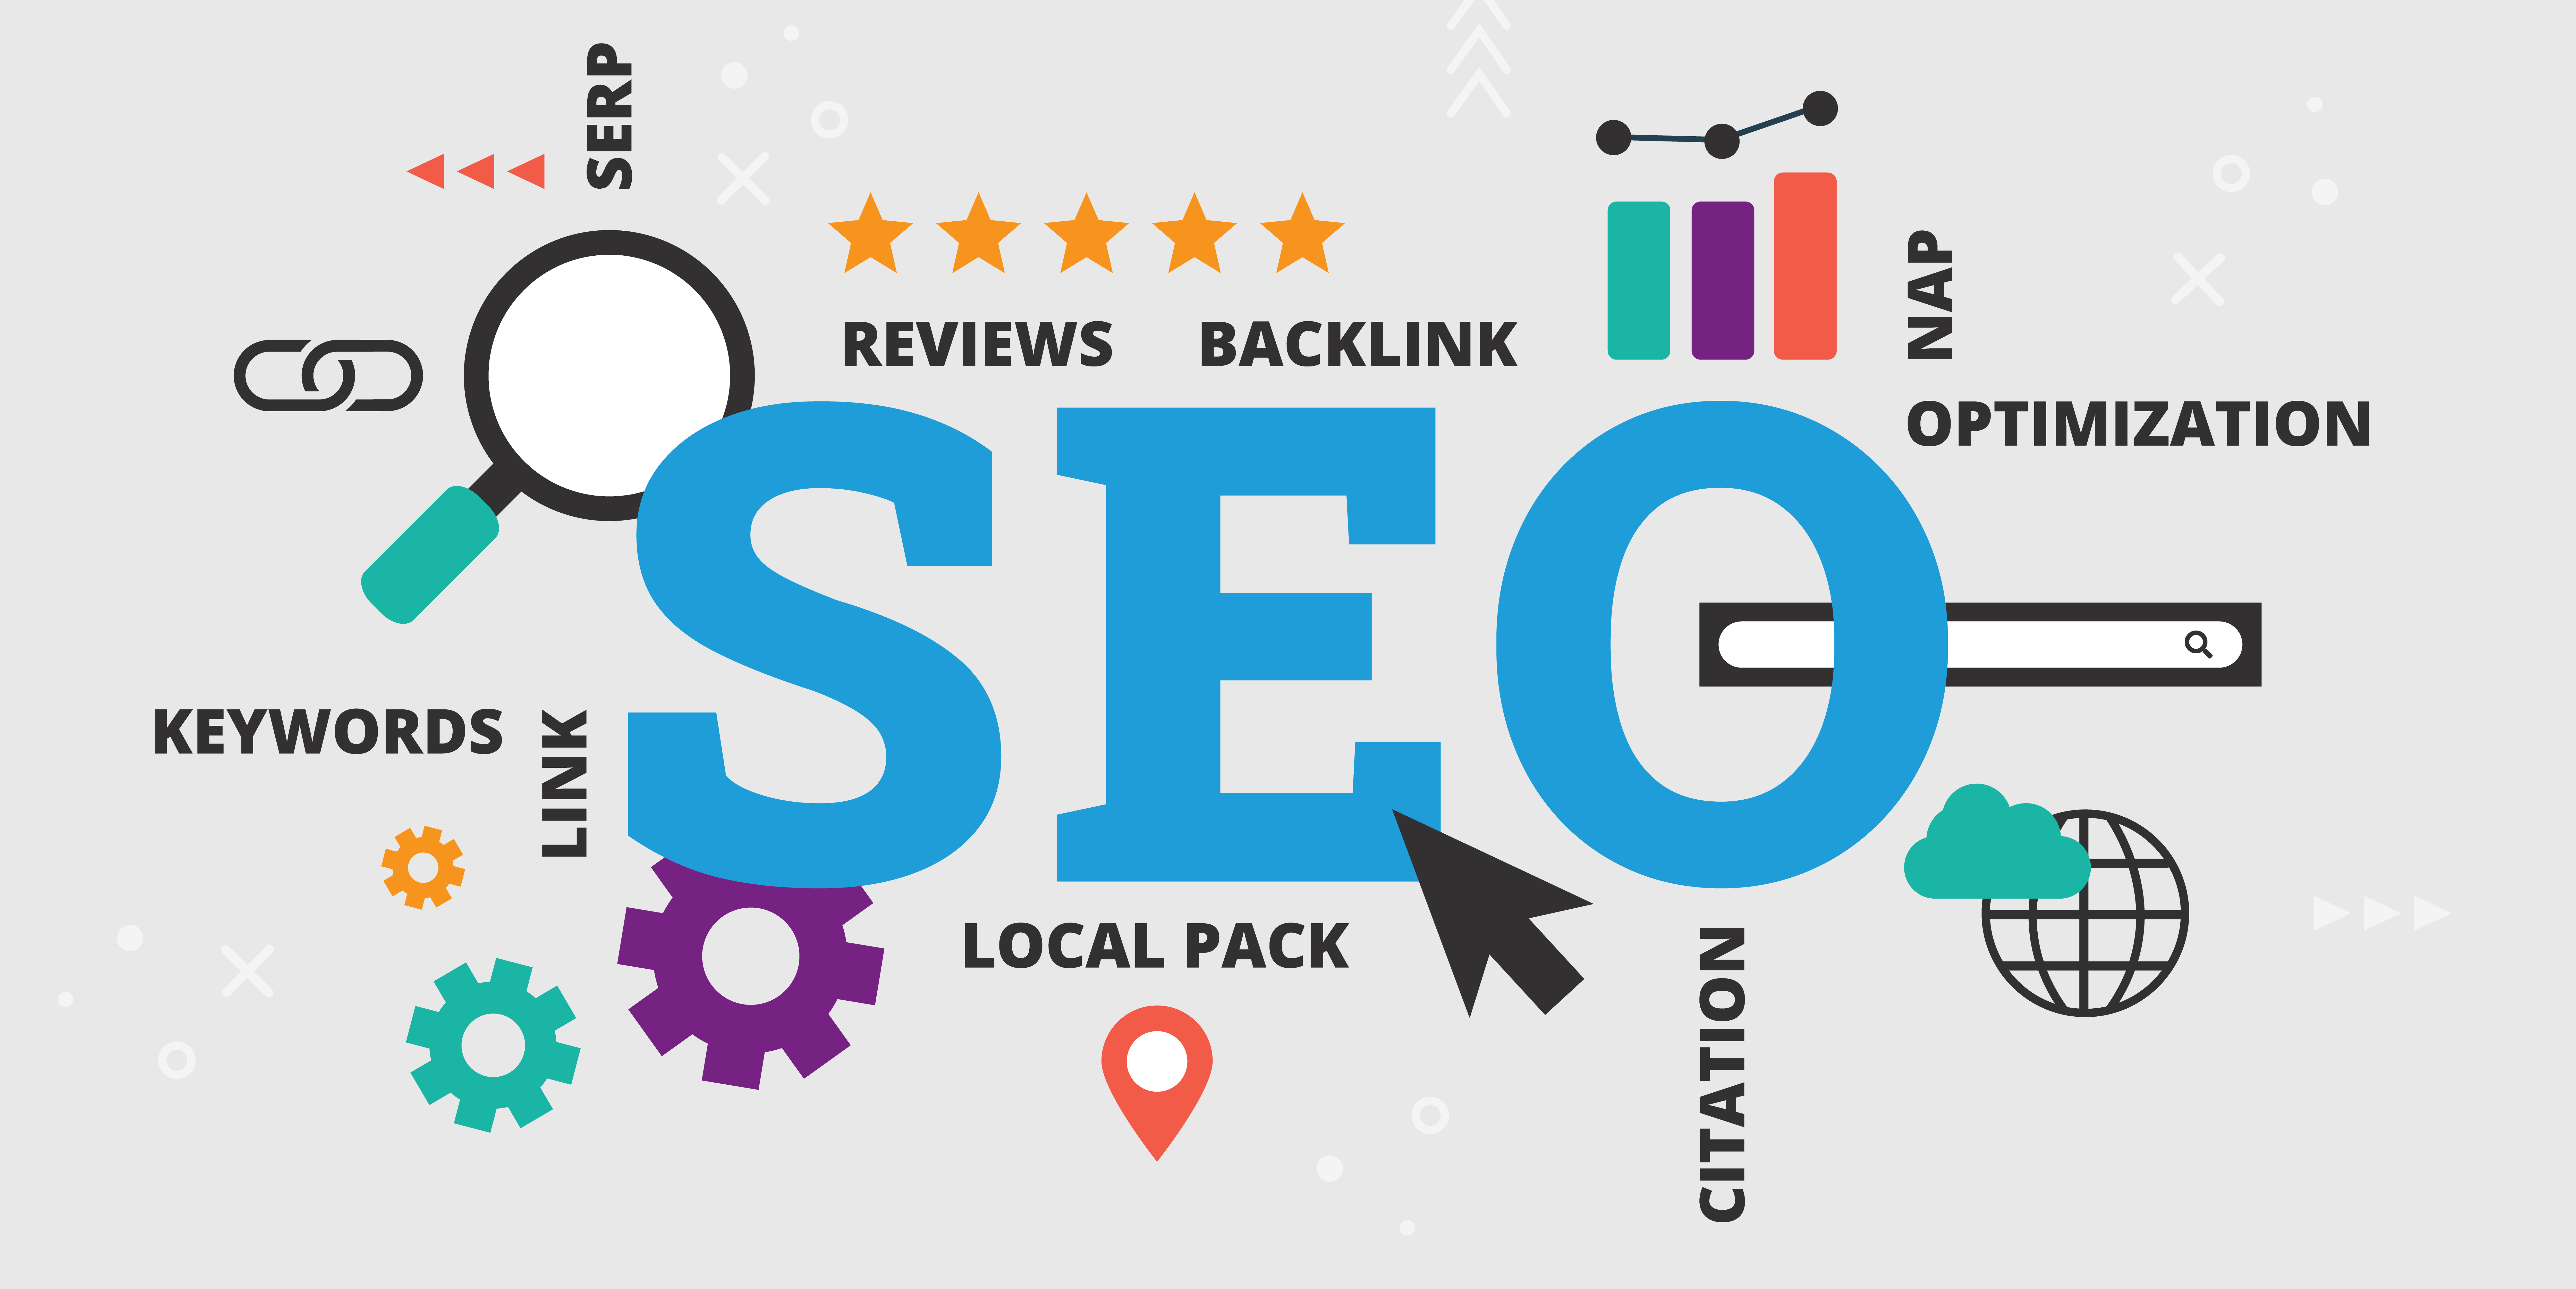 What Are the Fundamental Principles of an SEO Strategy?